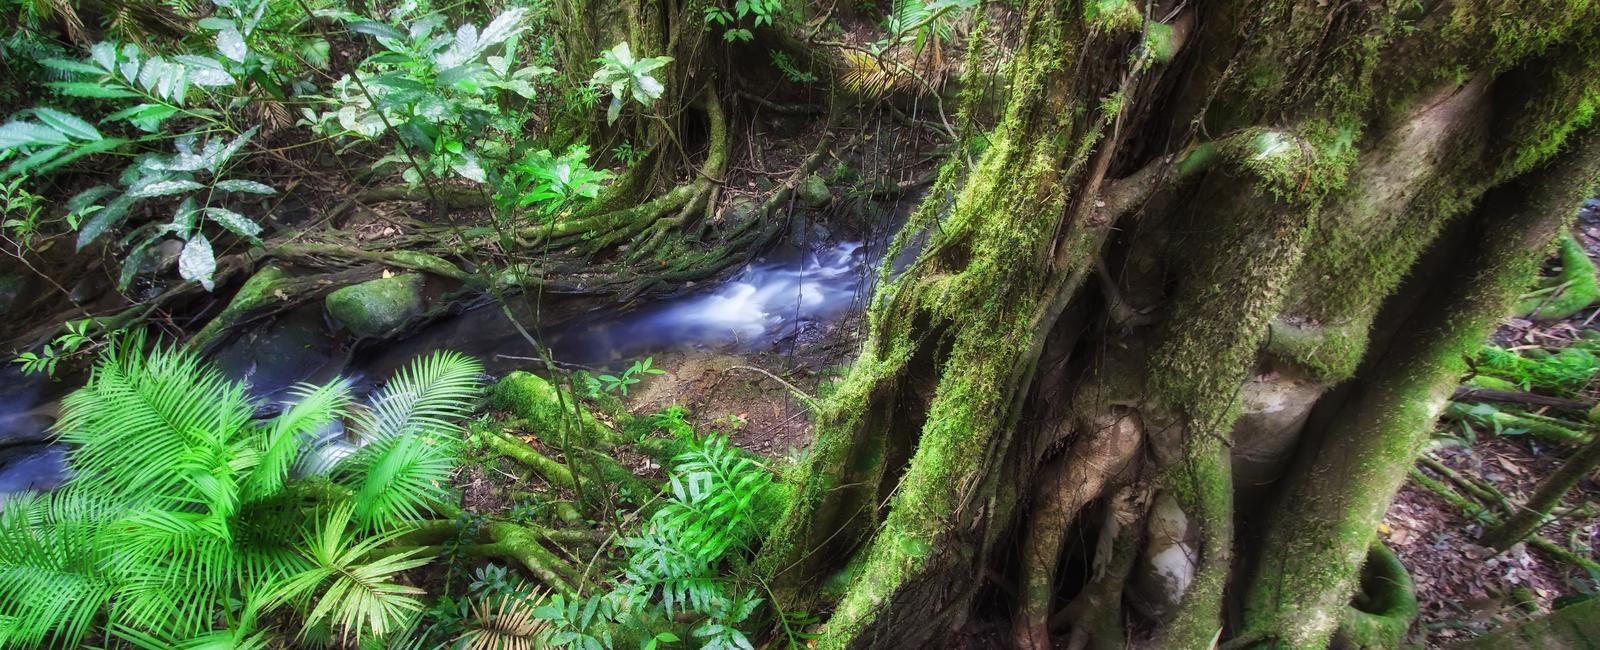 Where would you find the world s most ancient forest daintree forest north of cairns australia